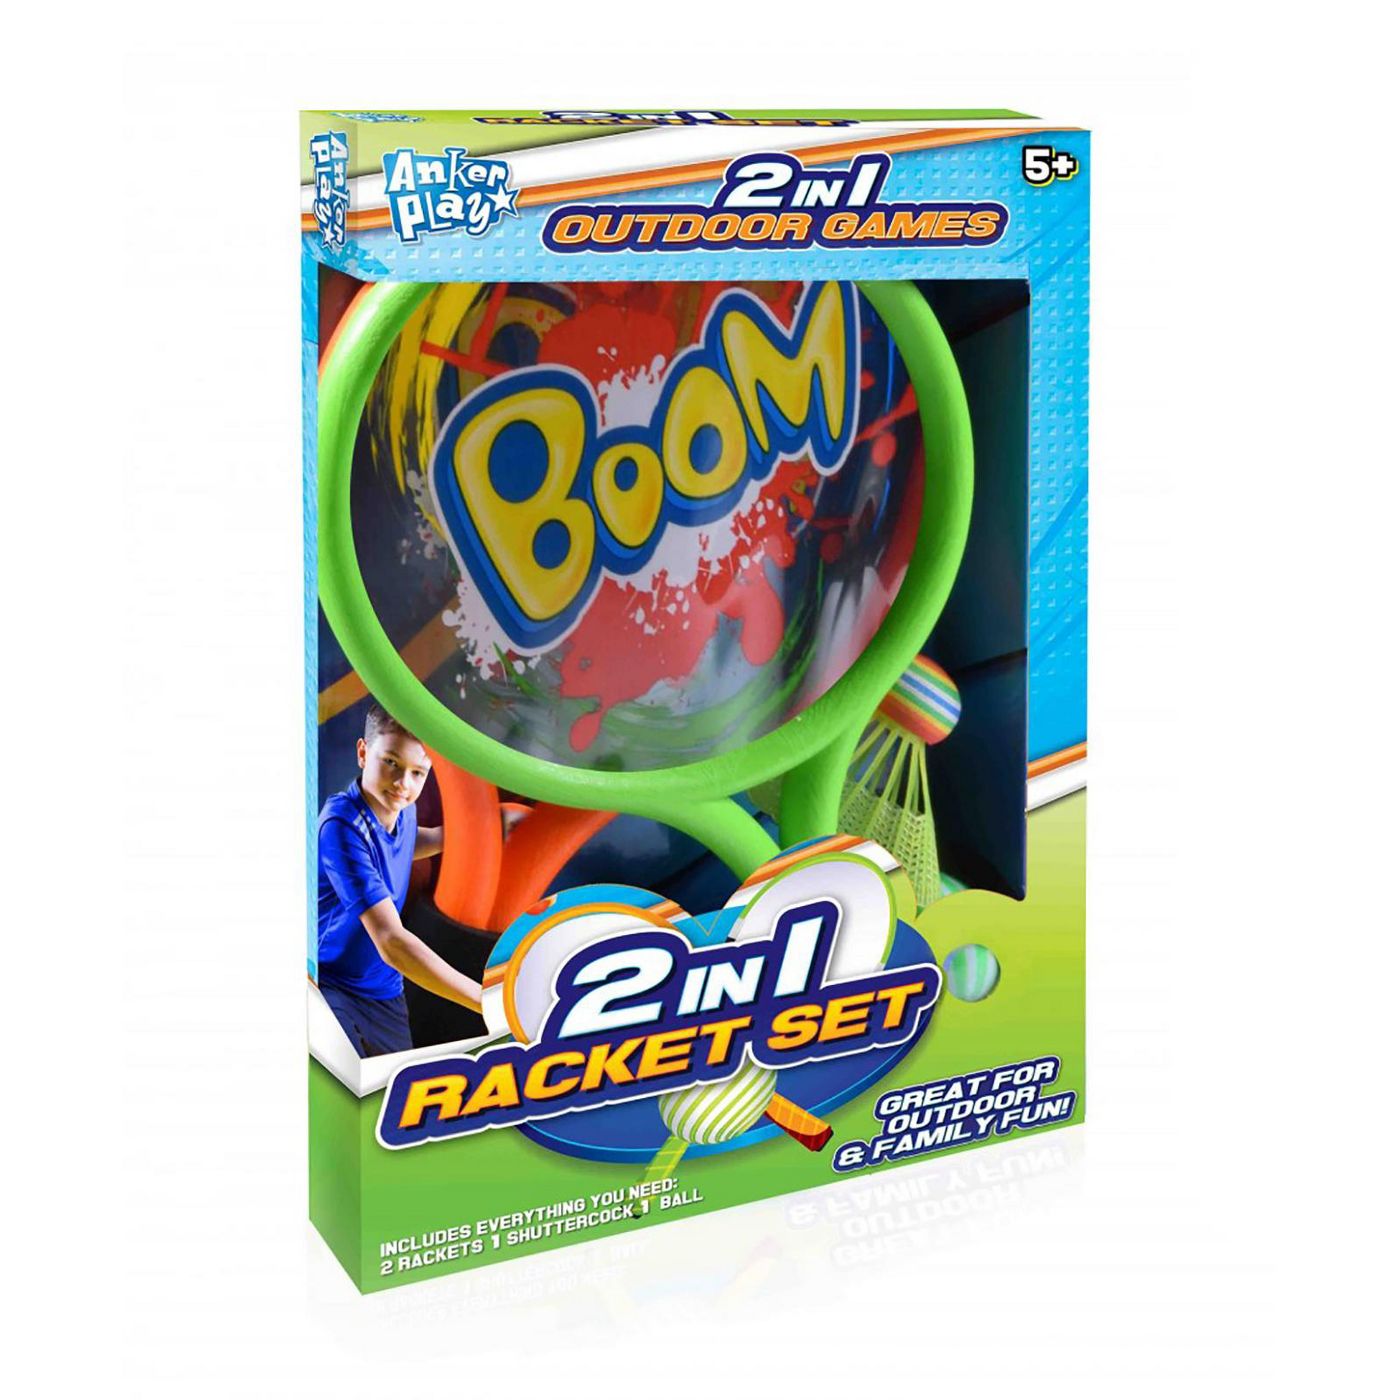 2 in 1 Racket Set - Teich Toys & Gifts